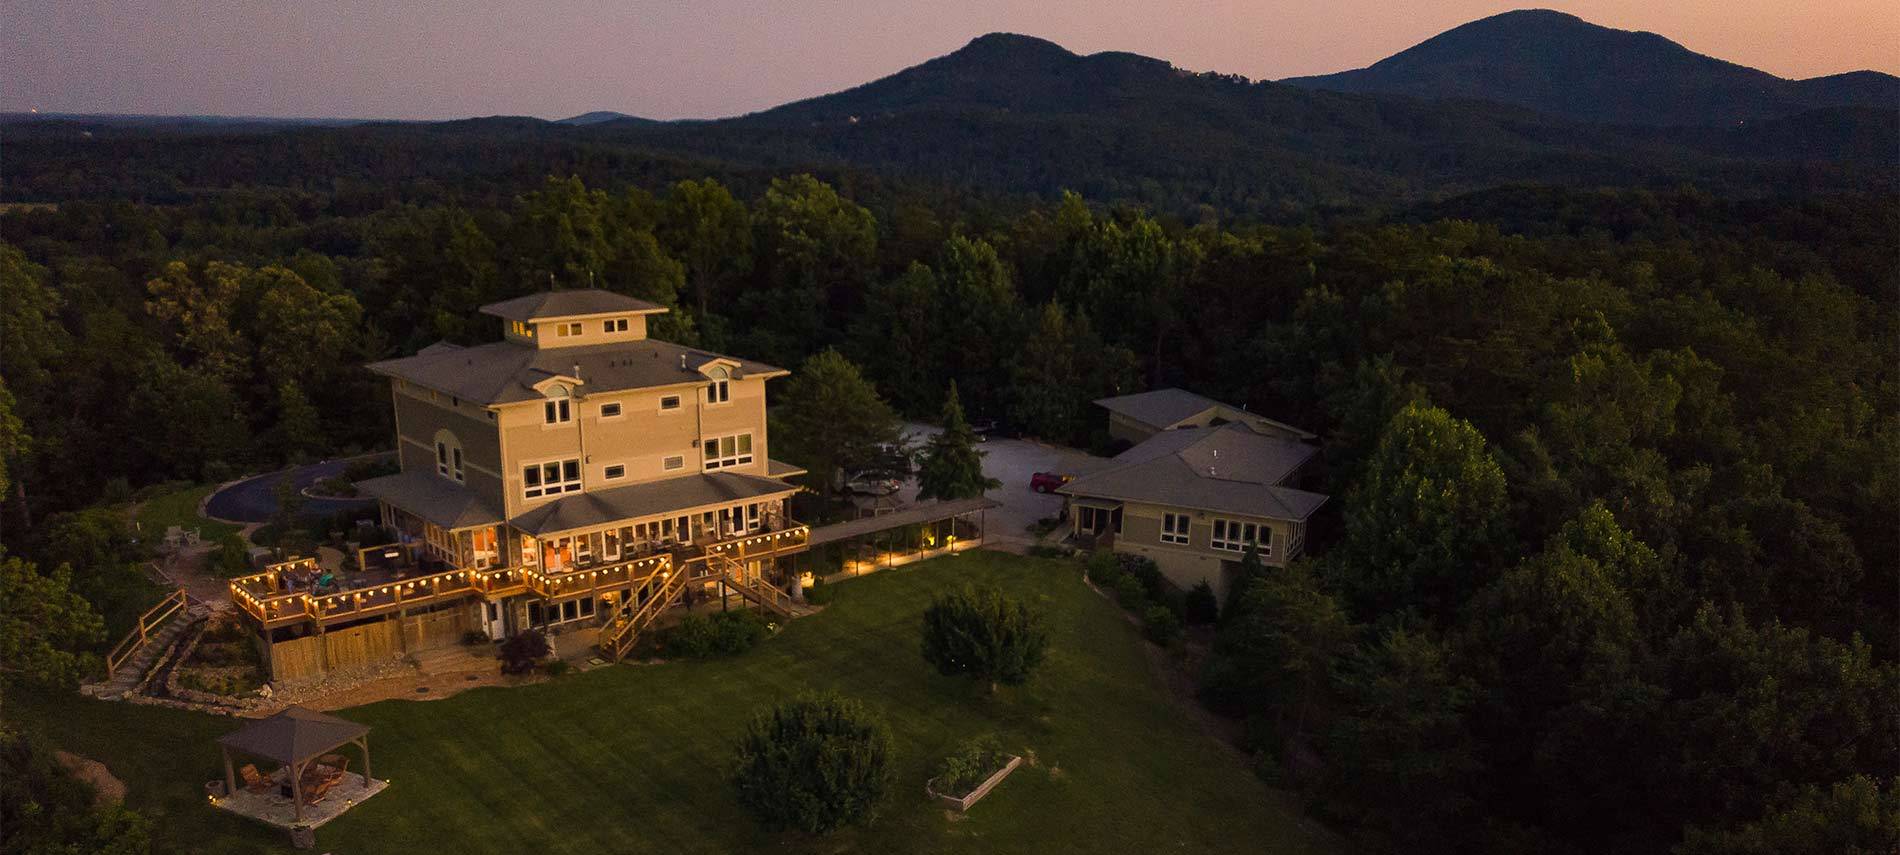 Arial shot of the Inn with the Mountains in the background and the sun is setting on the Inn.